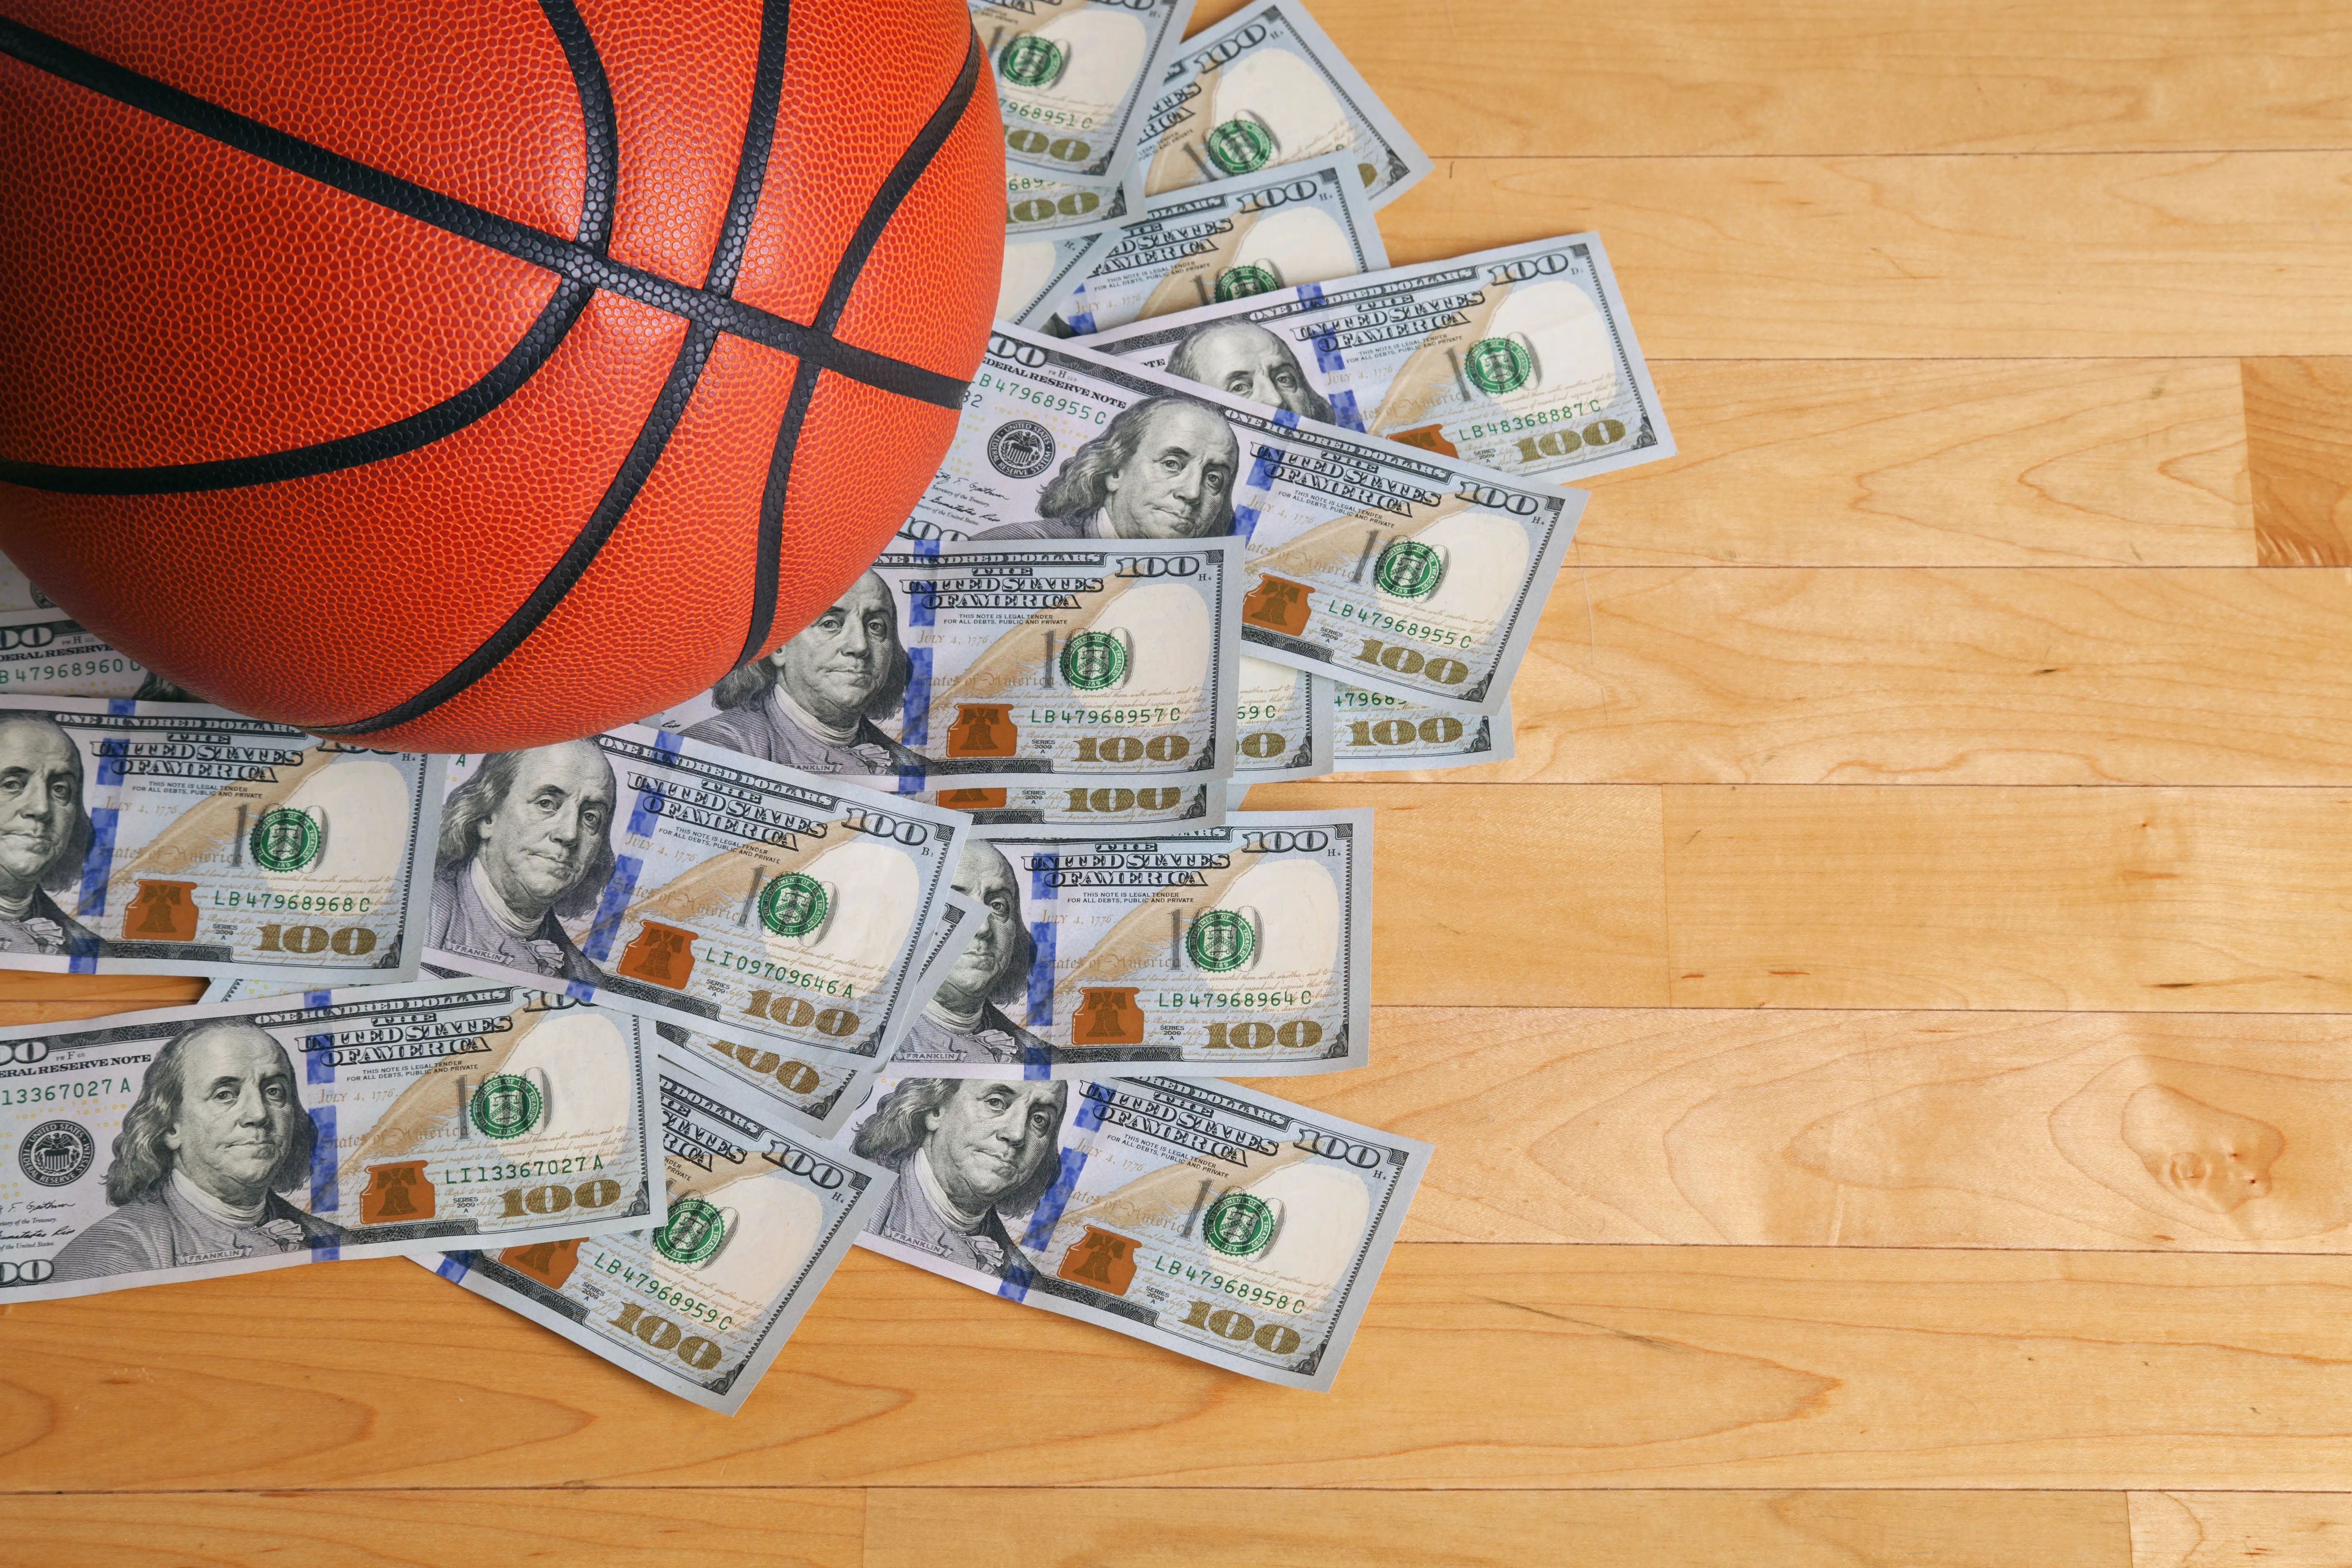 basketball on top of heap of cash